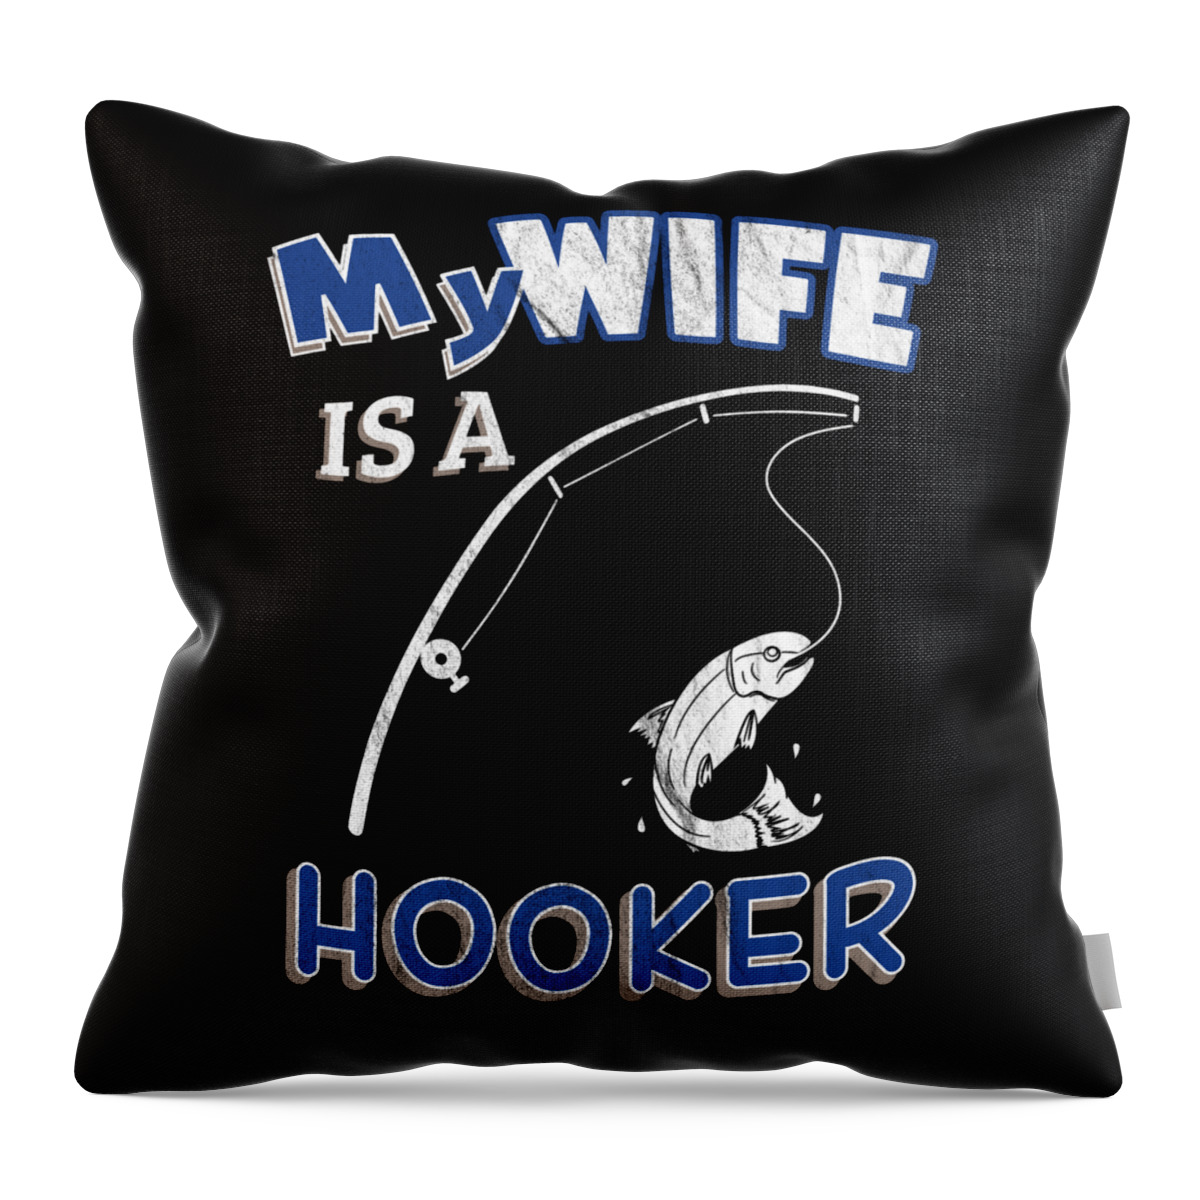 My Wife Is A Hooker Funny Ironic Pun Fishing Throw Pillow by Henry